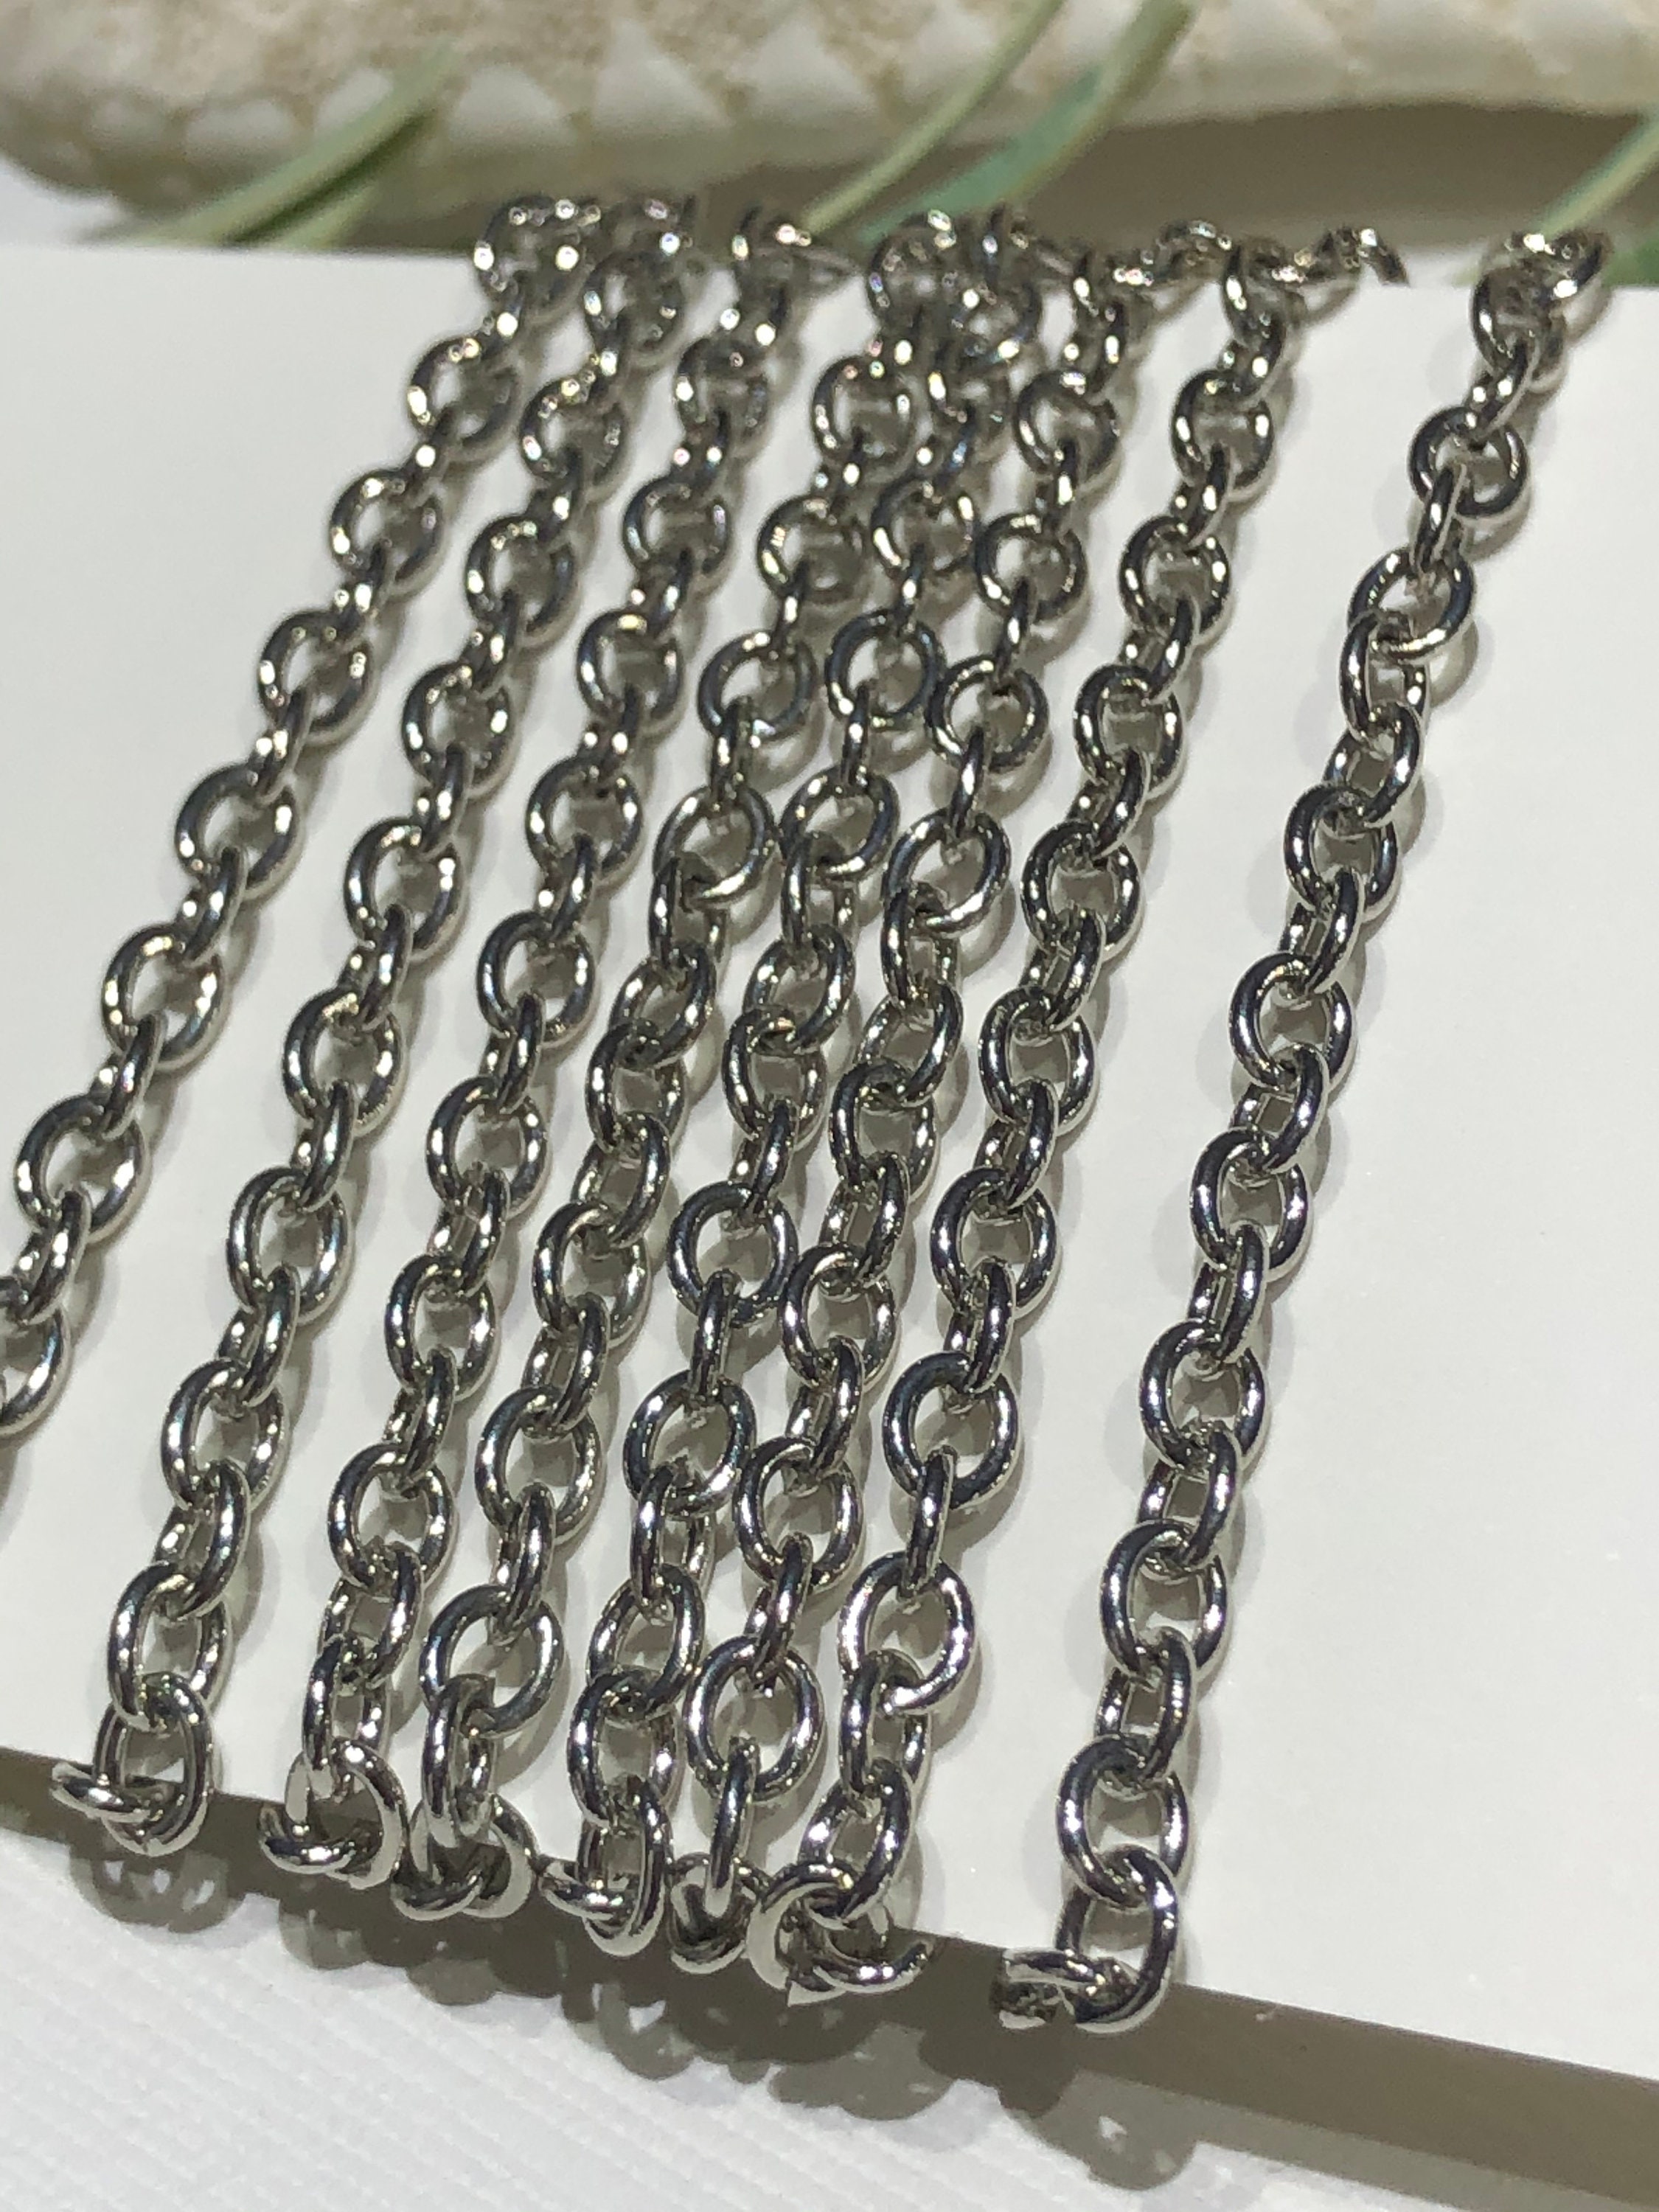 30 Feet X Stainless Steel Chain Bulk by the Foot, Bulk Chain by the Inch  for Necklace Making, Cable Link Rolo Chain Bulk by the Yard Meter 